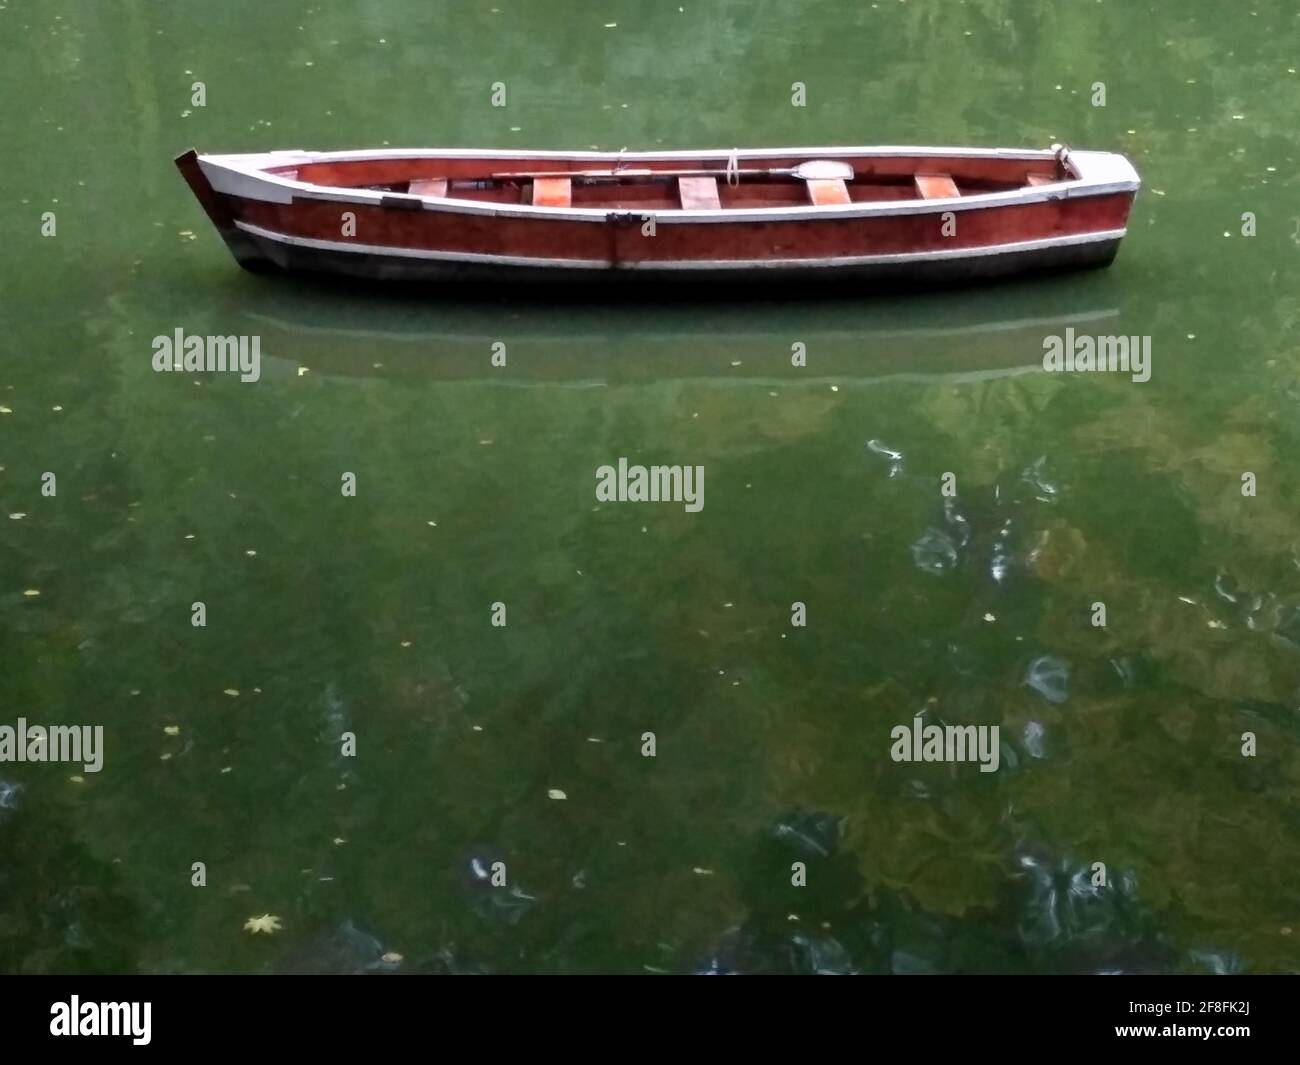 Wooden boat without people with green lake water reflection, row boat side view. Stock Photo